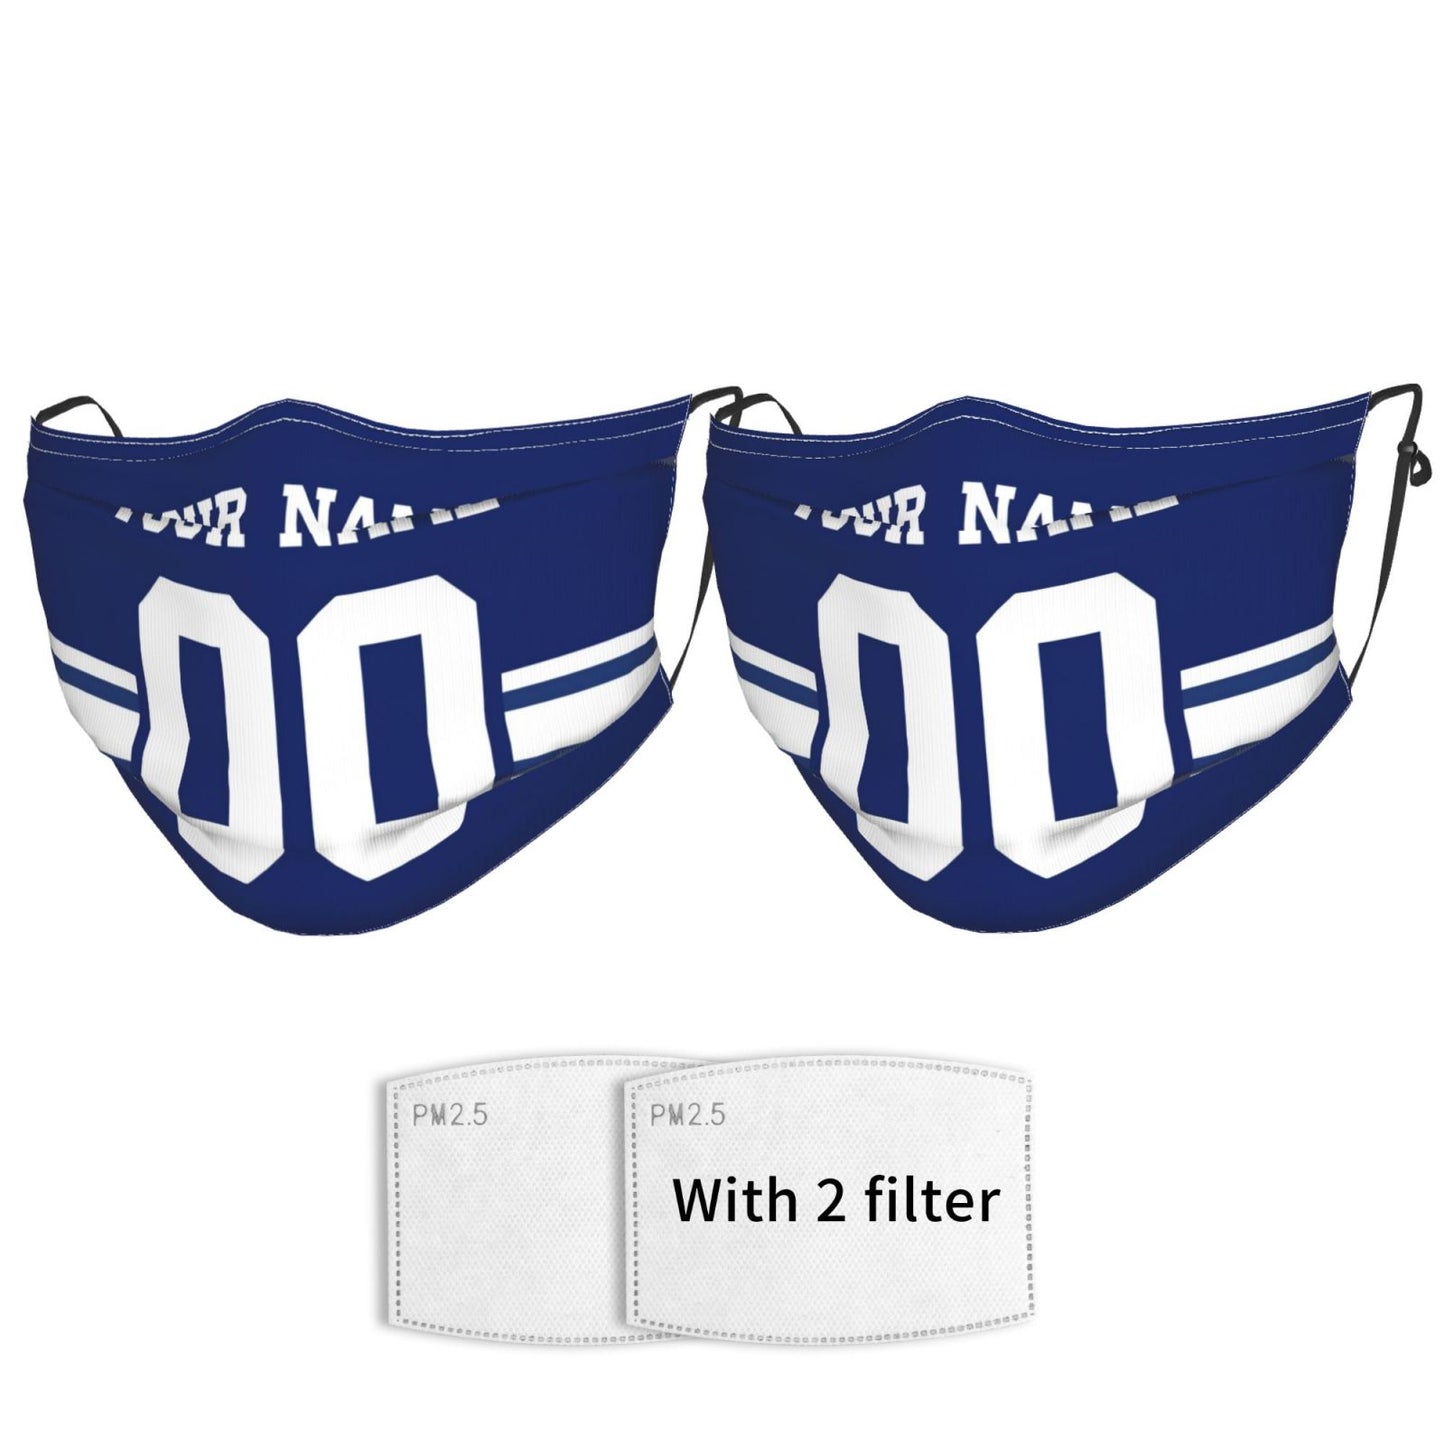 2-Pack New York Giants Face Covering Football Team Decorative Adult Face Mask With Filters PM 2.5 Royal